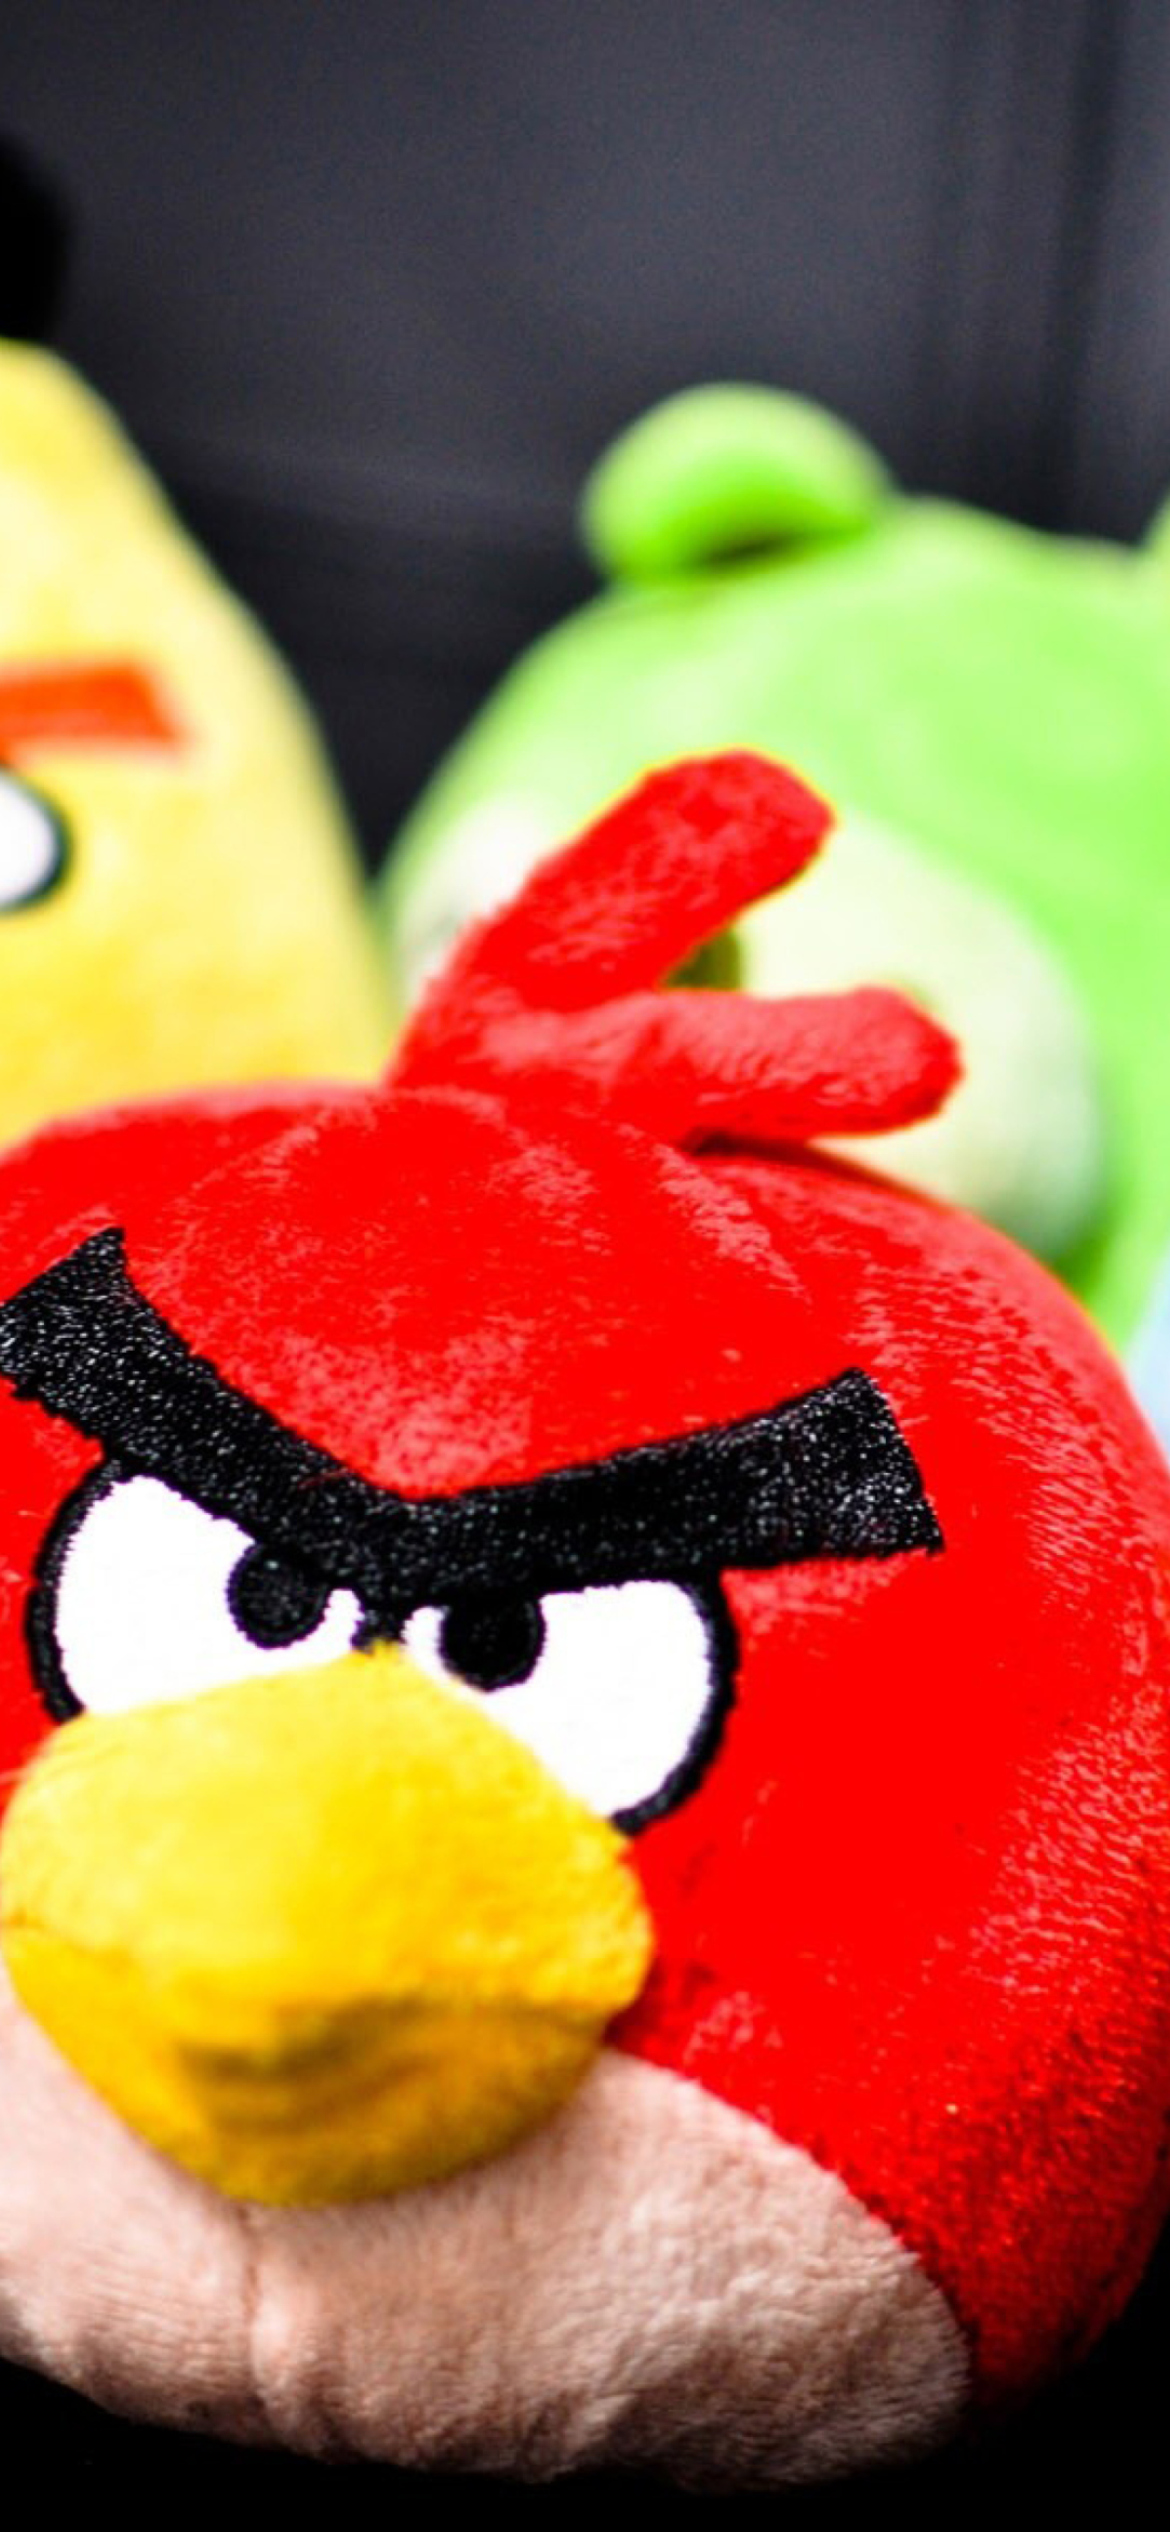 Angry Birds Plush Toy wallpaper 1170x2532